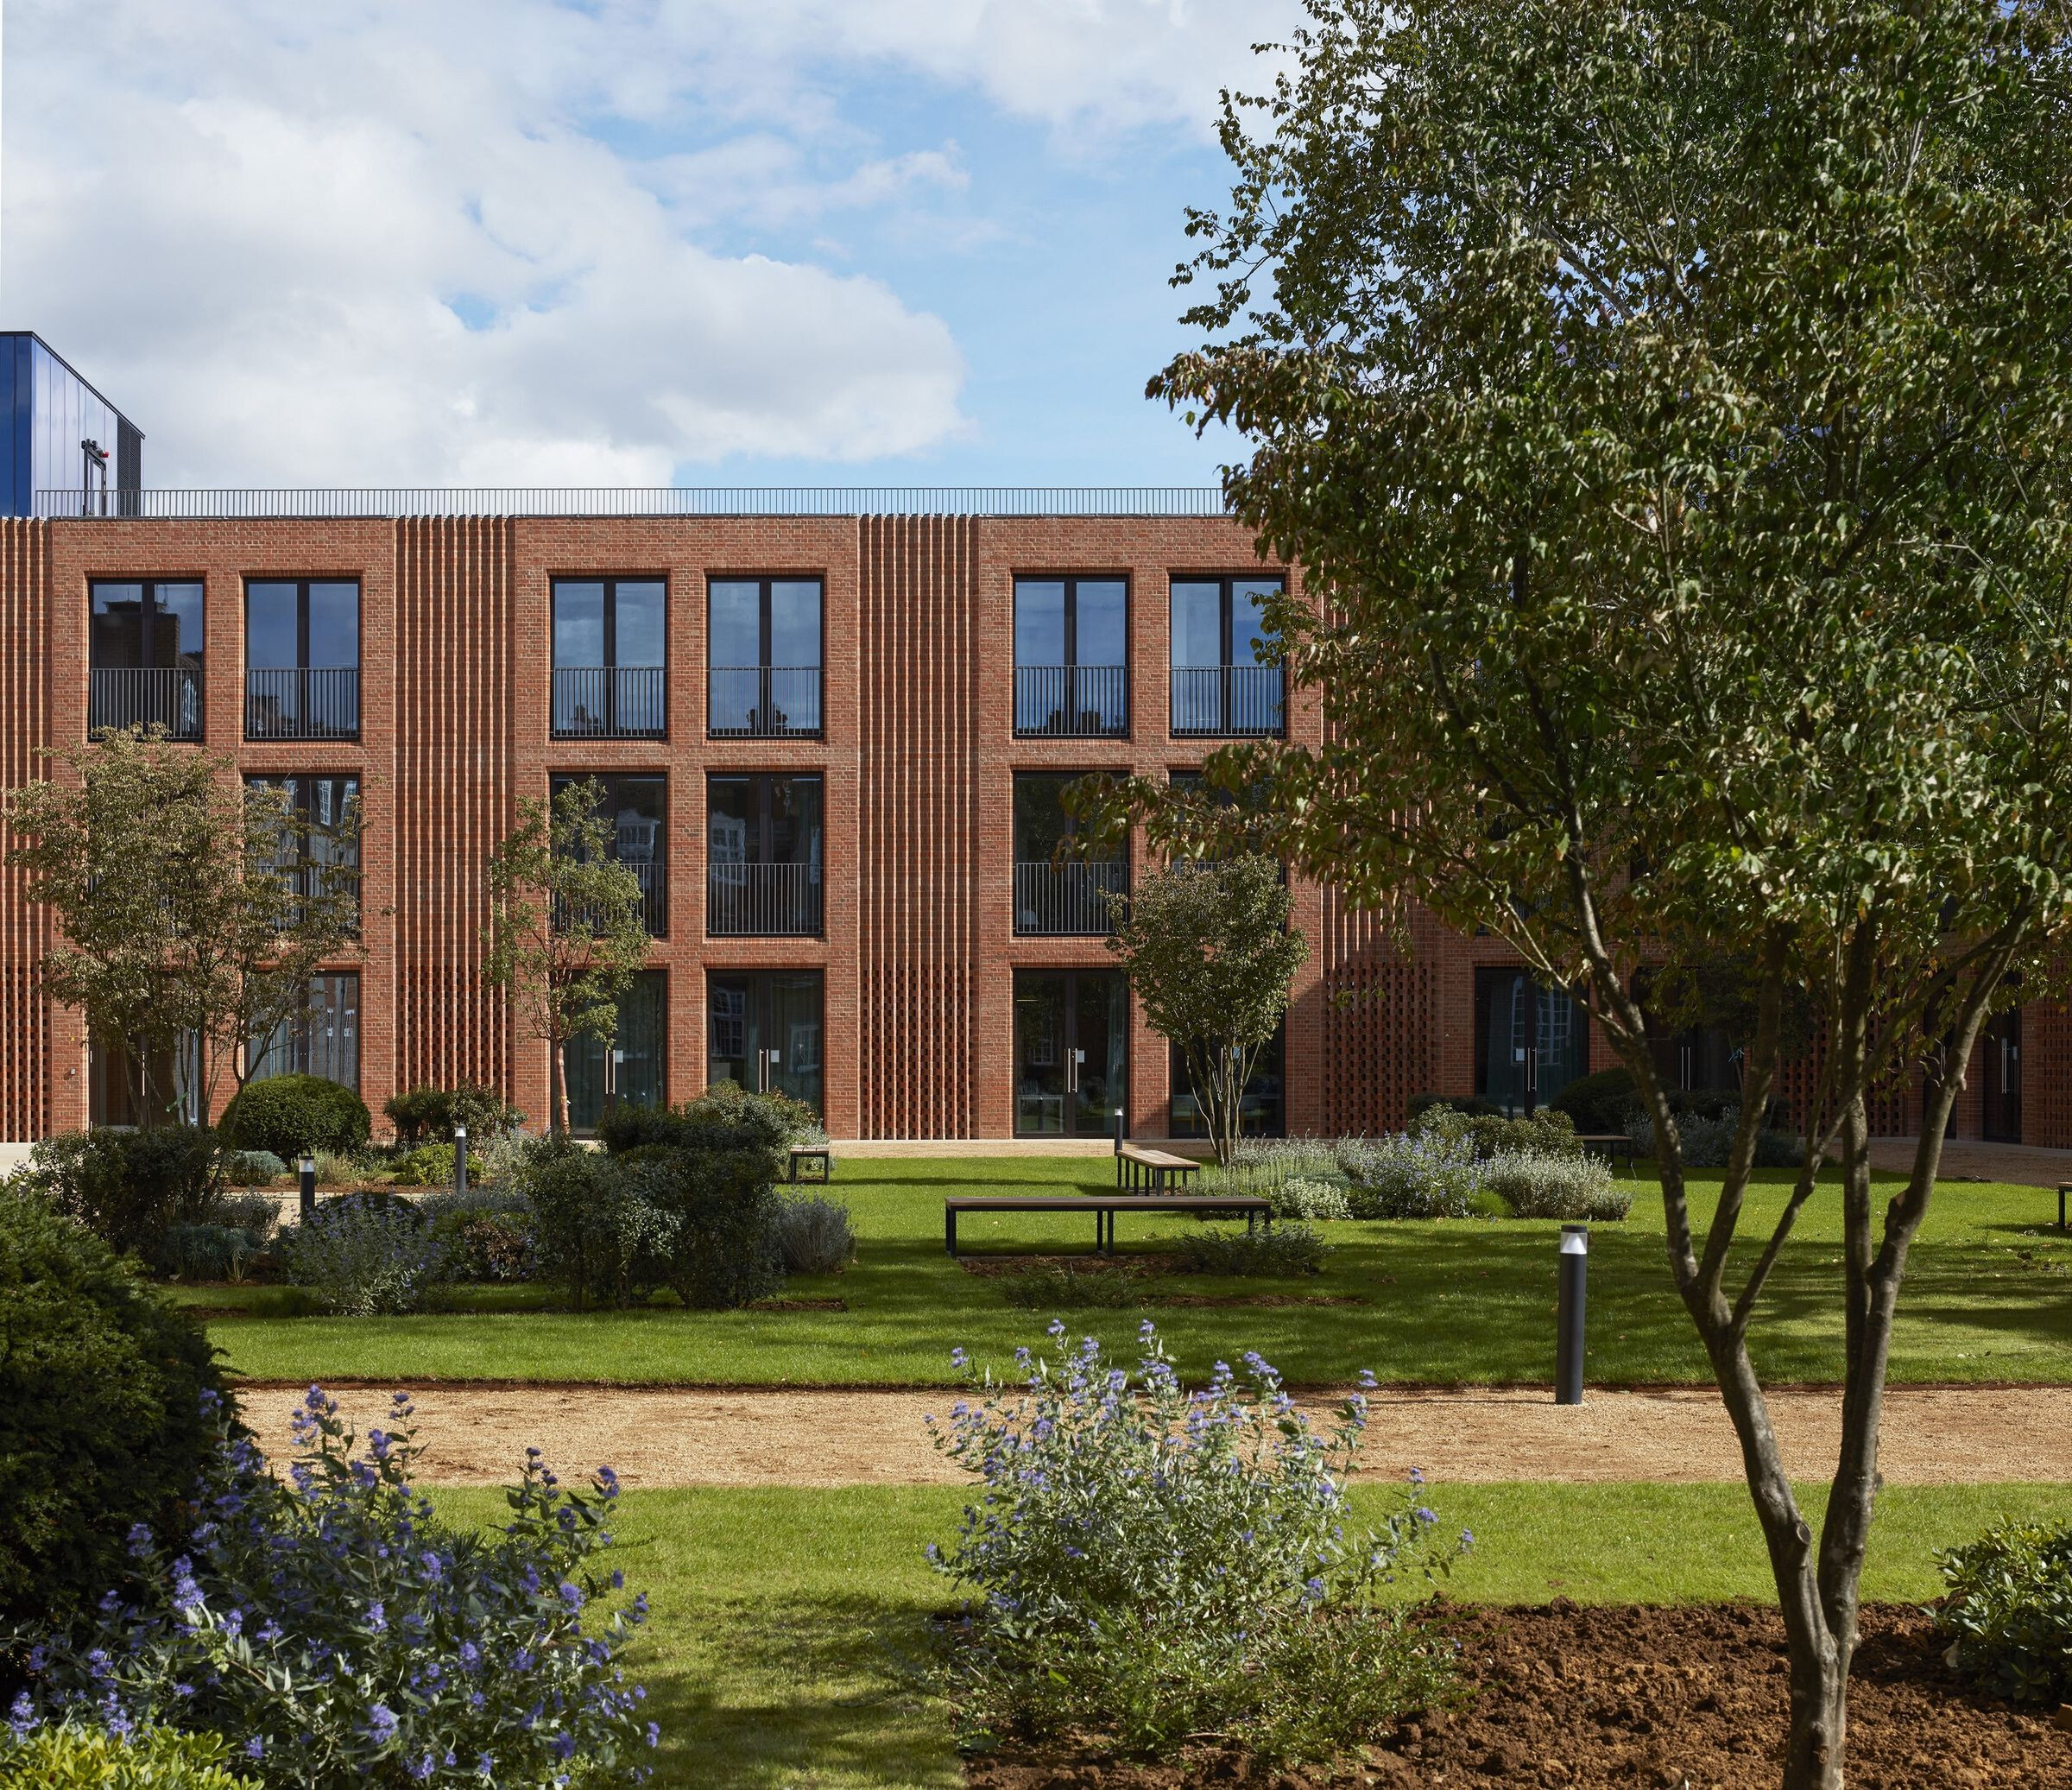 photo_credit photo : Dennis Gilbert/VIEW | project : Newnham College by Walters & Cohen Architects